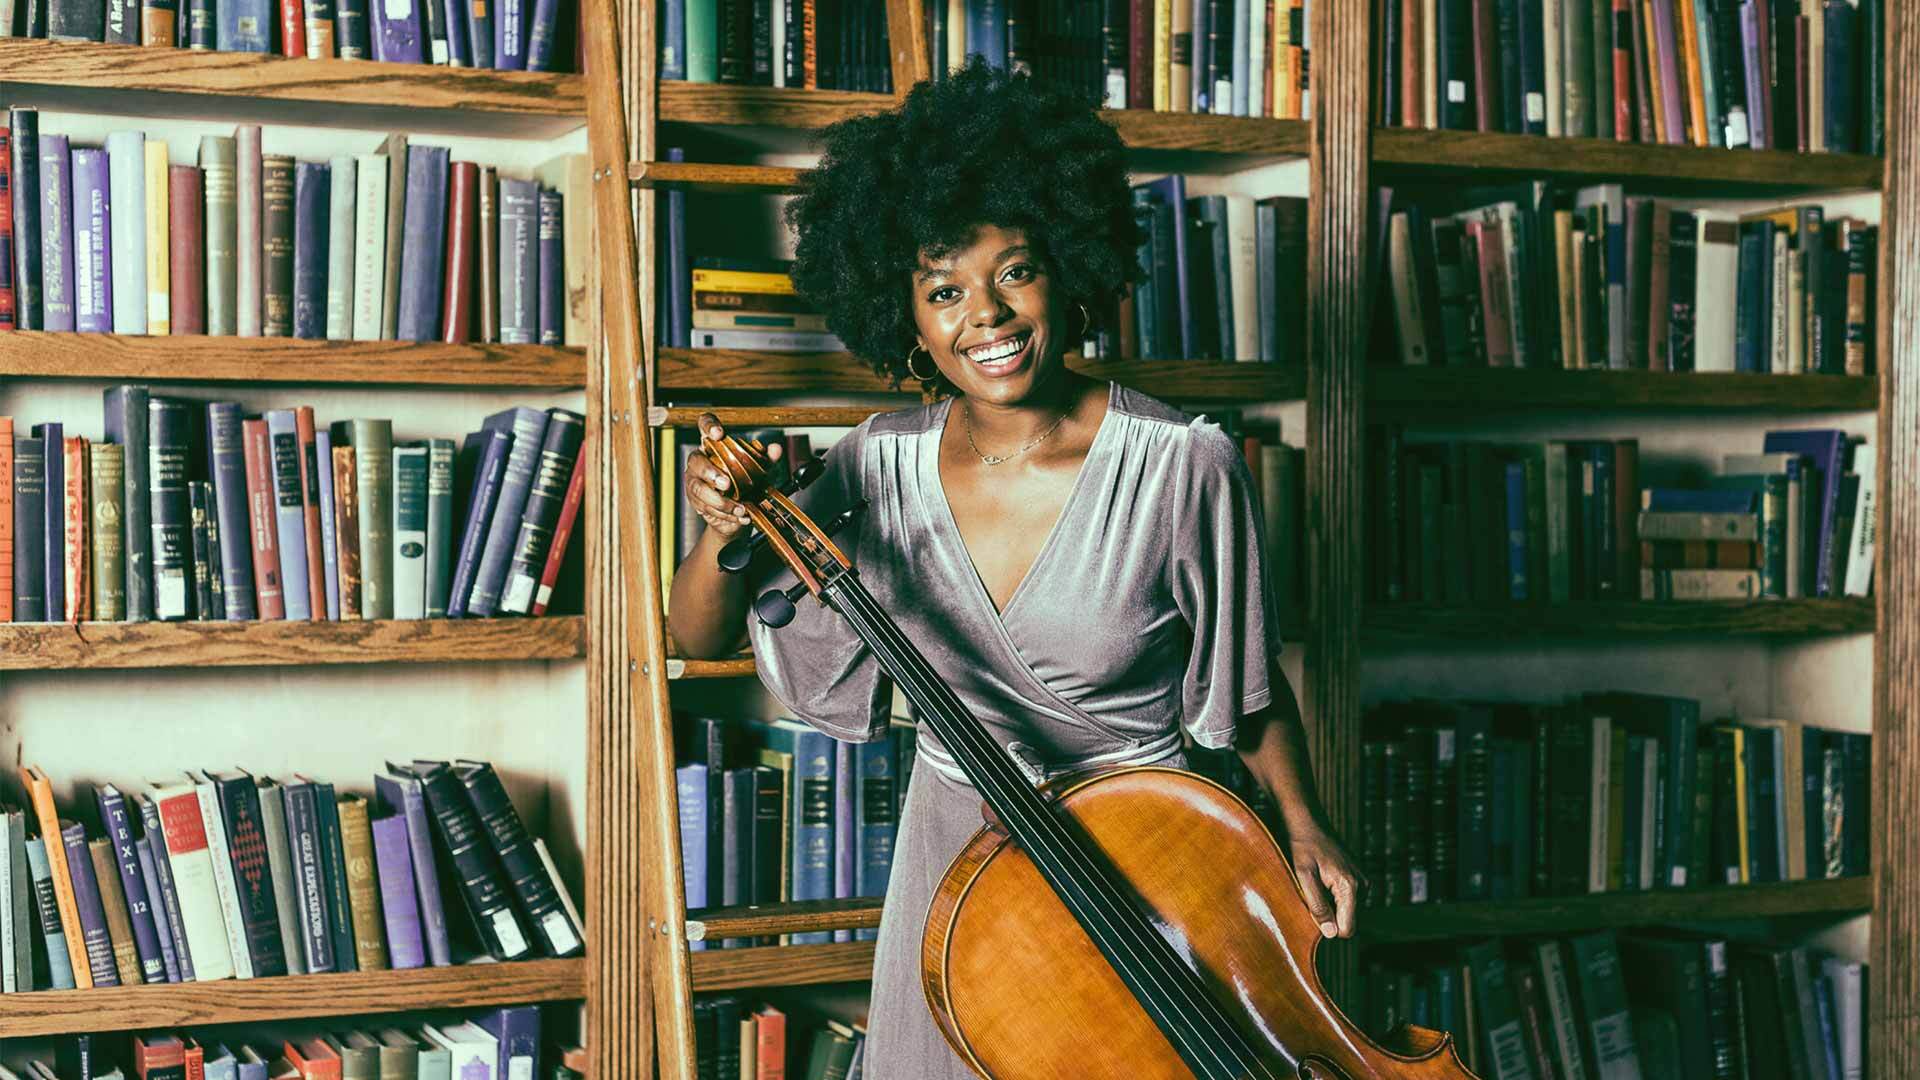 Titilayo Ayangade with her cello in front of bookshelves filled with books.